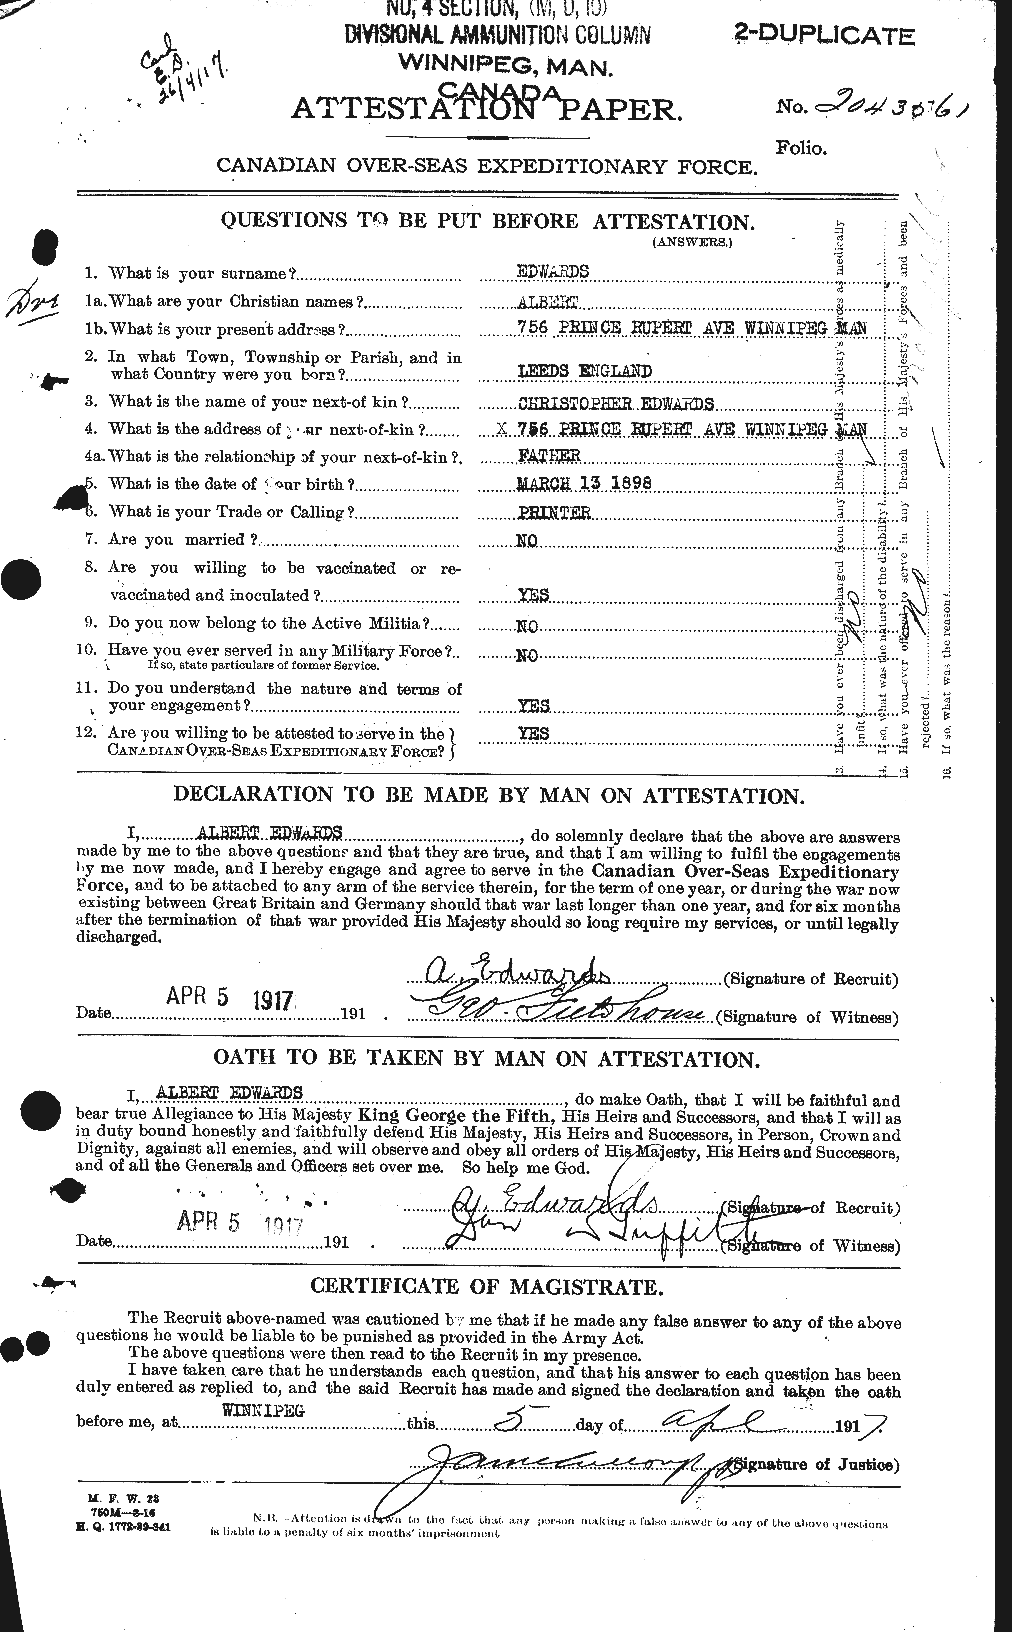 Personnel Records of the First World War - CEF 313089a